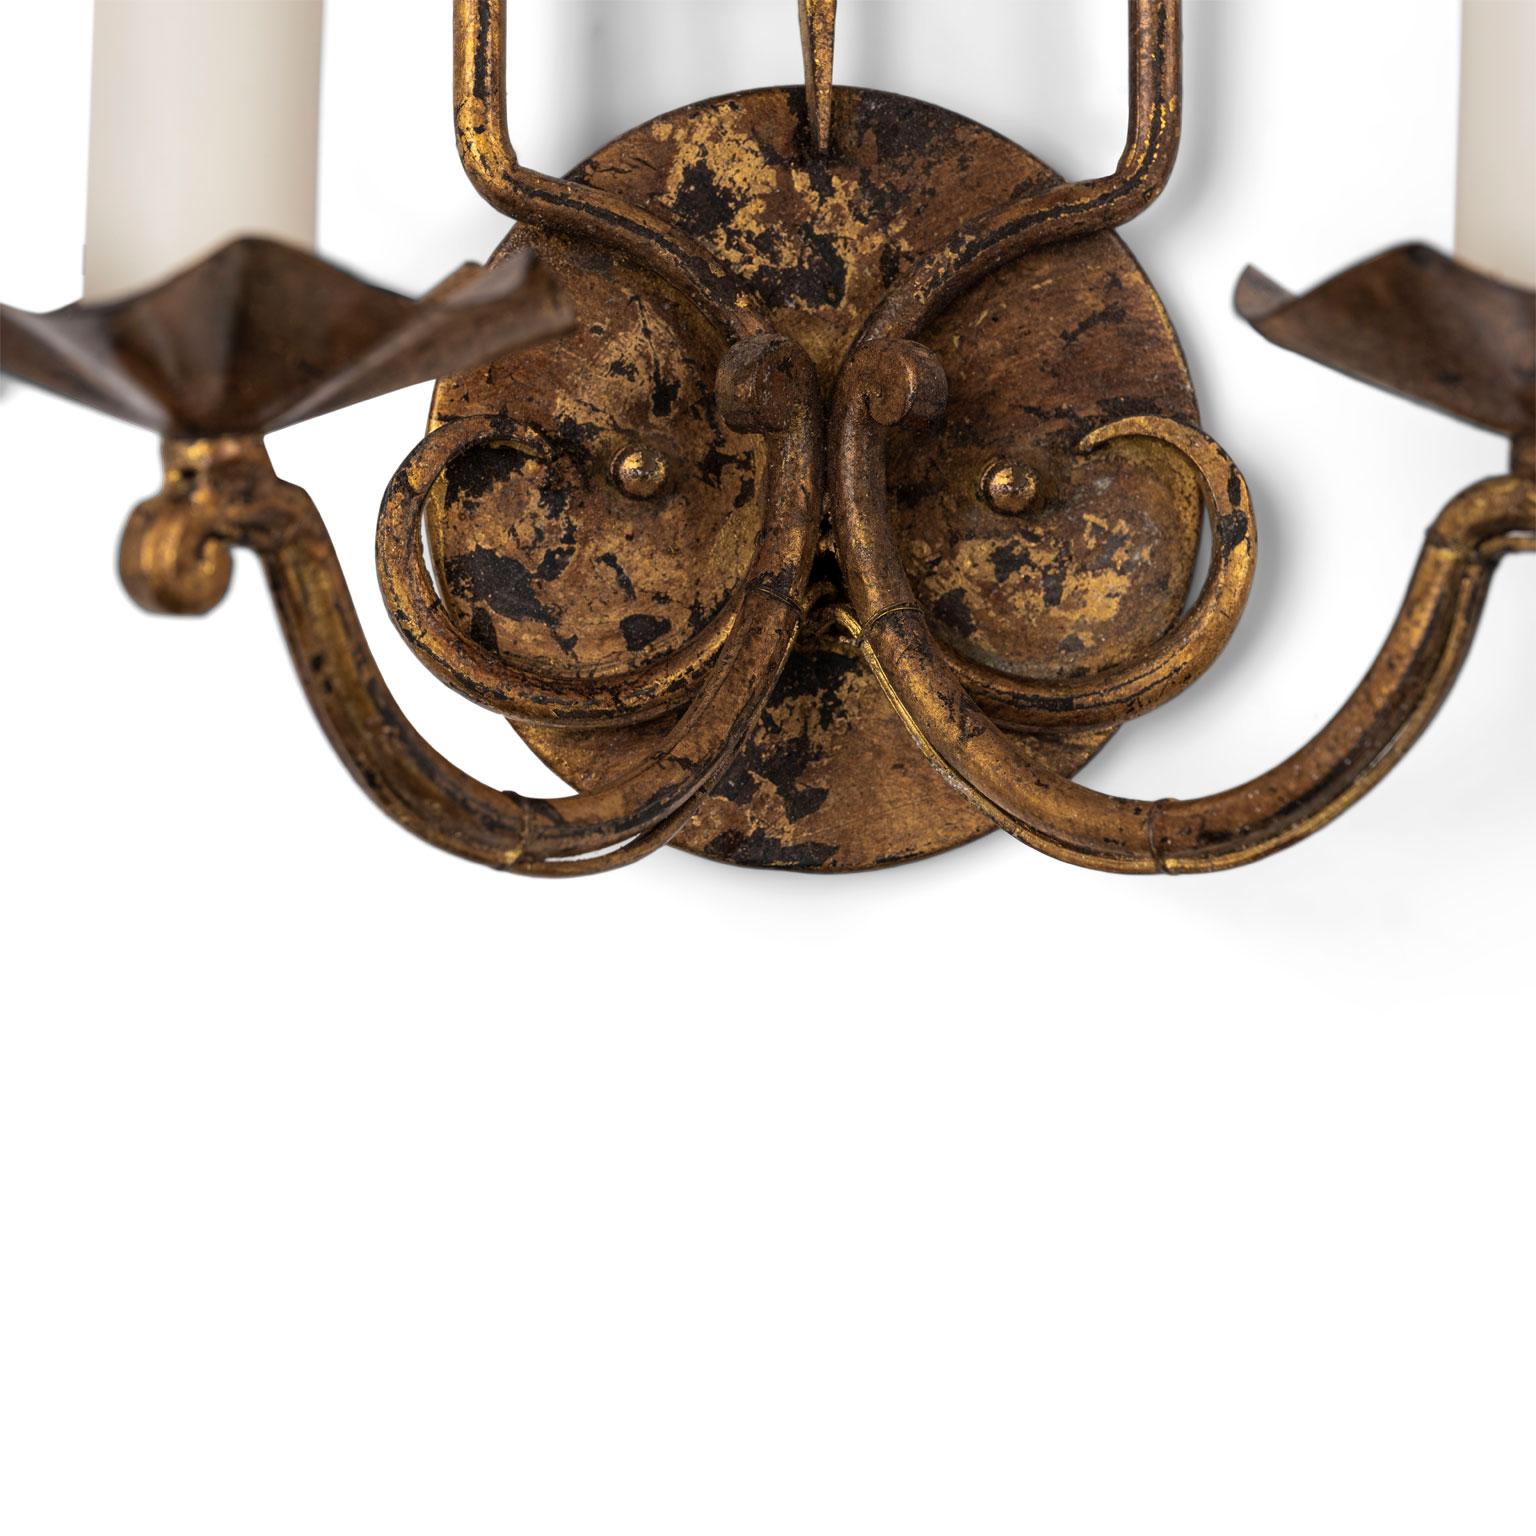 Pair of gilt-iron French sconces, two-arm gilded iron sconces from France, circa 1880-1900. Newly wired for use within the USA using all UL listed parts. Back-plate added for easy wall-installation and finished to match sconces.